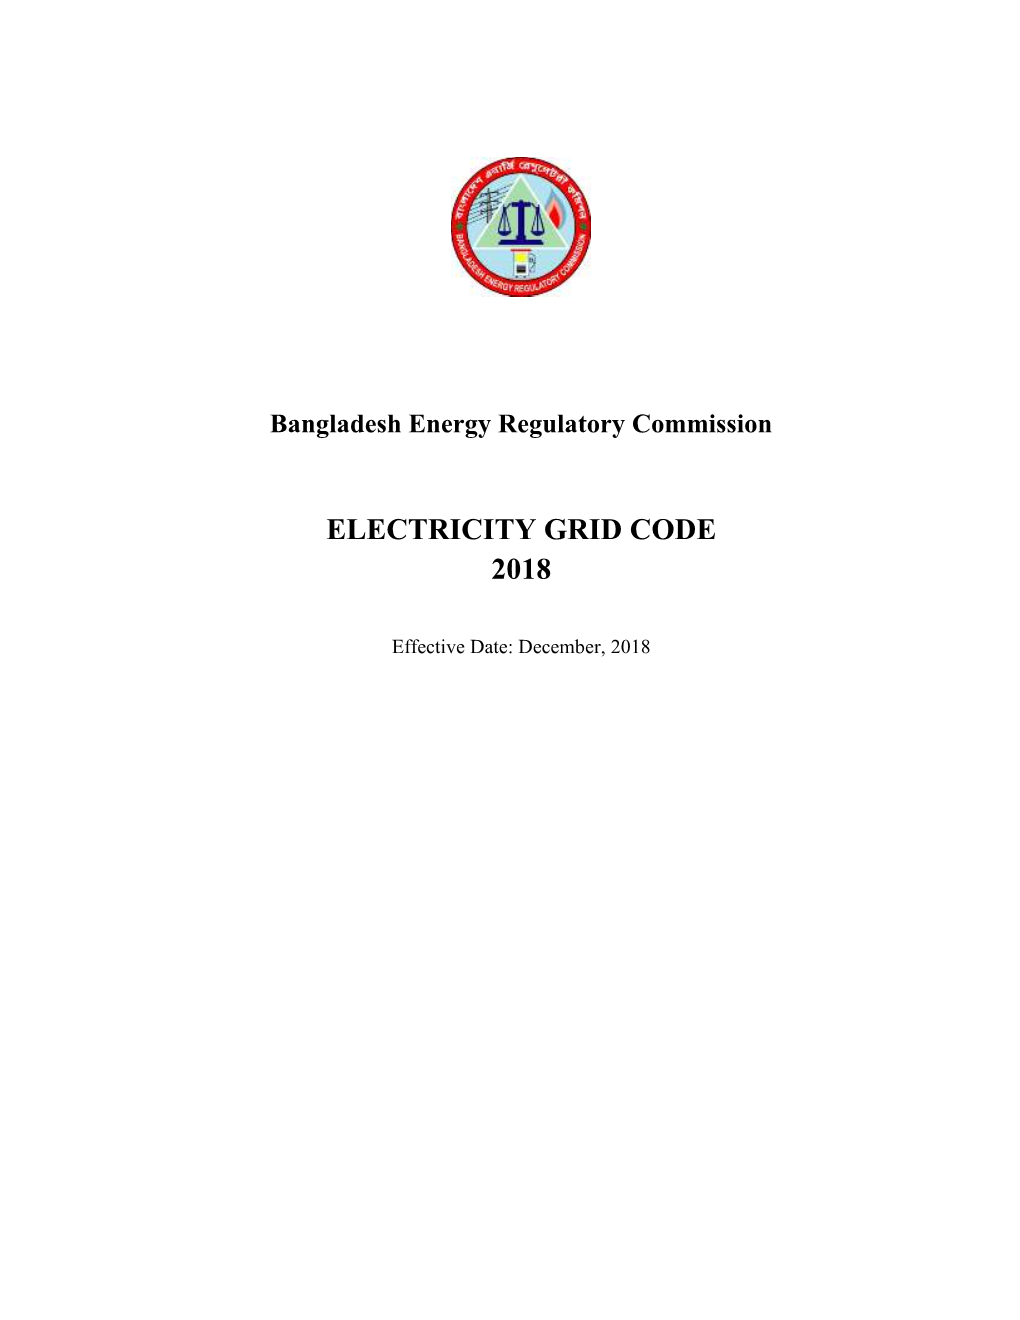 Electricity Grid Code 2018